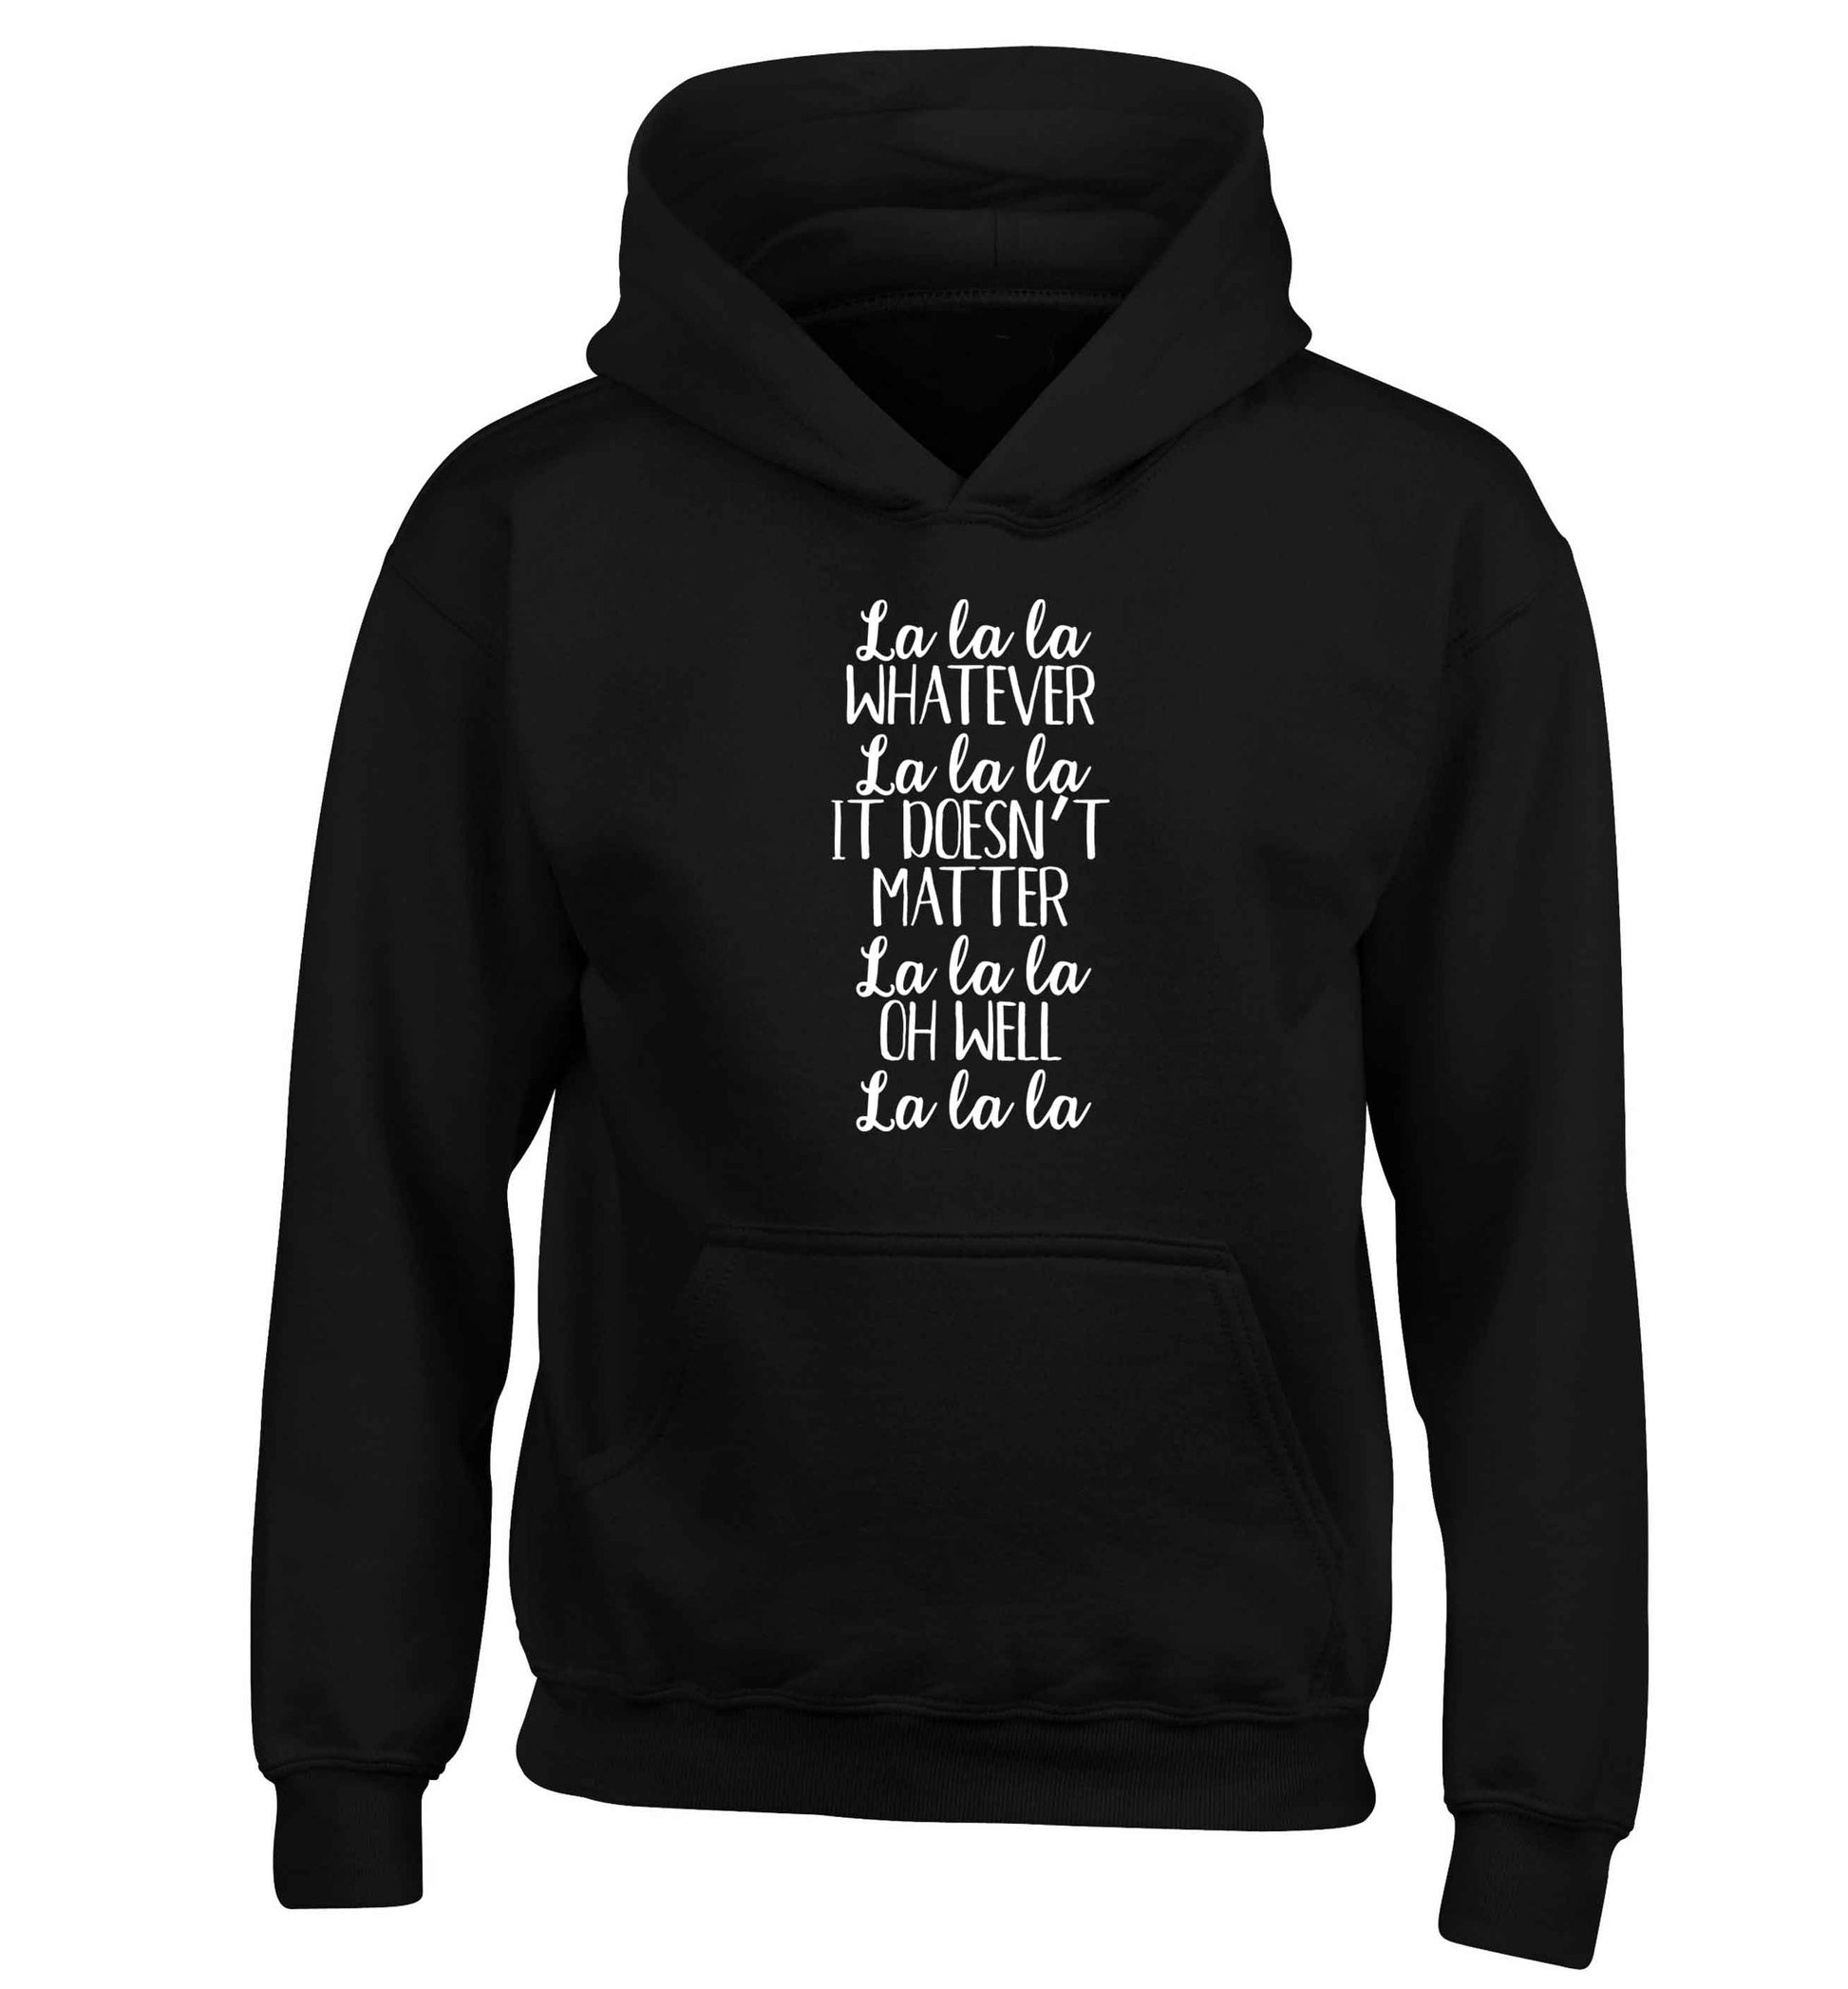 Viral song lyrics - check! Gen z babies where you at? children's black hoodie 12-13 Years